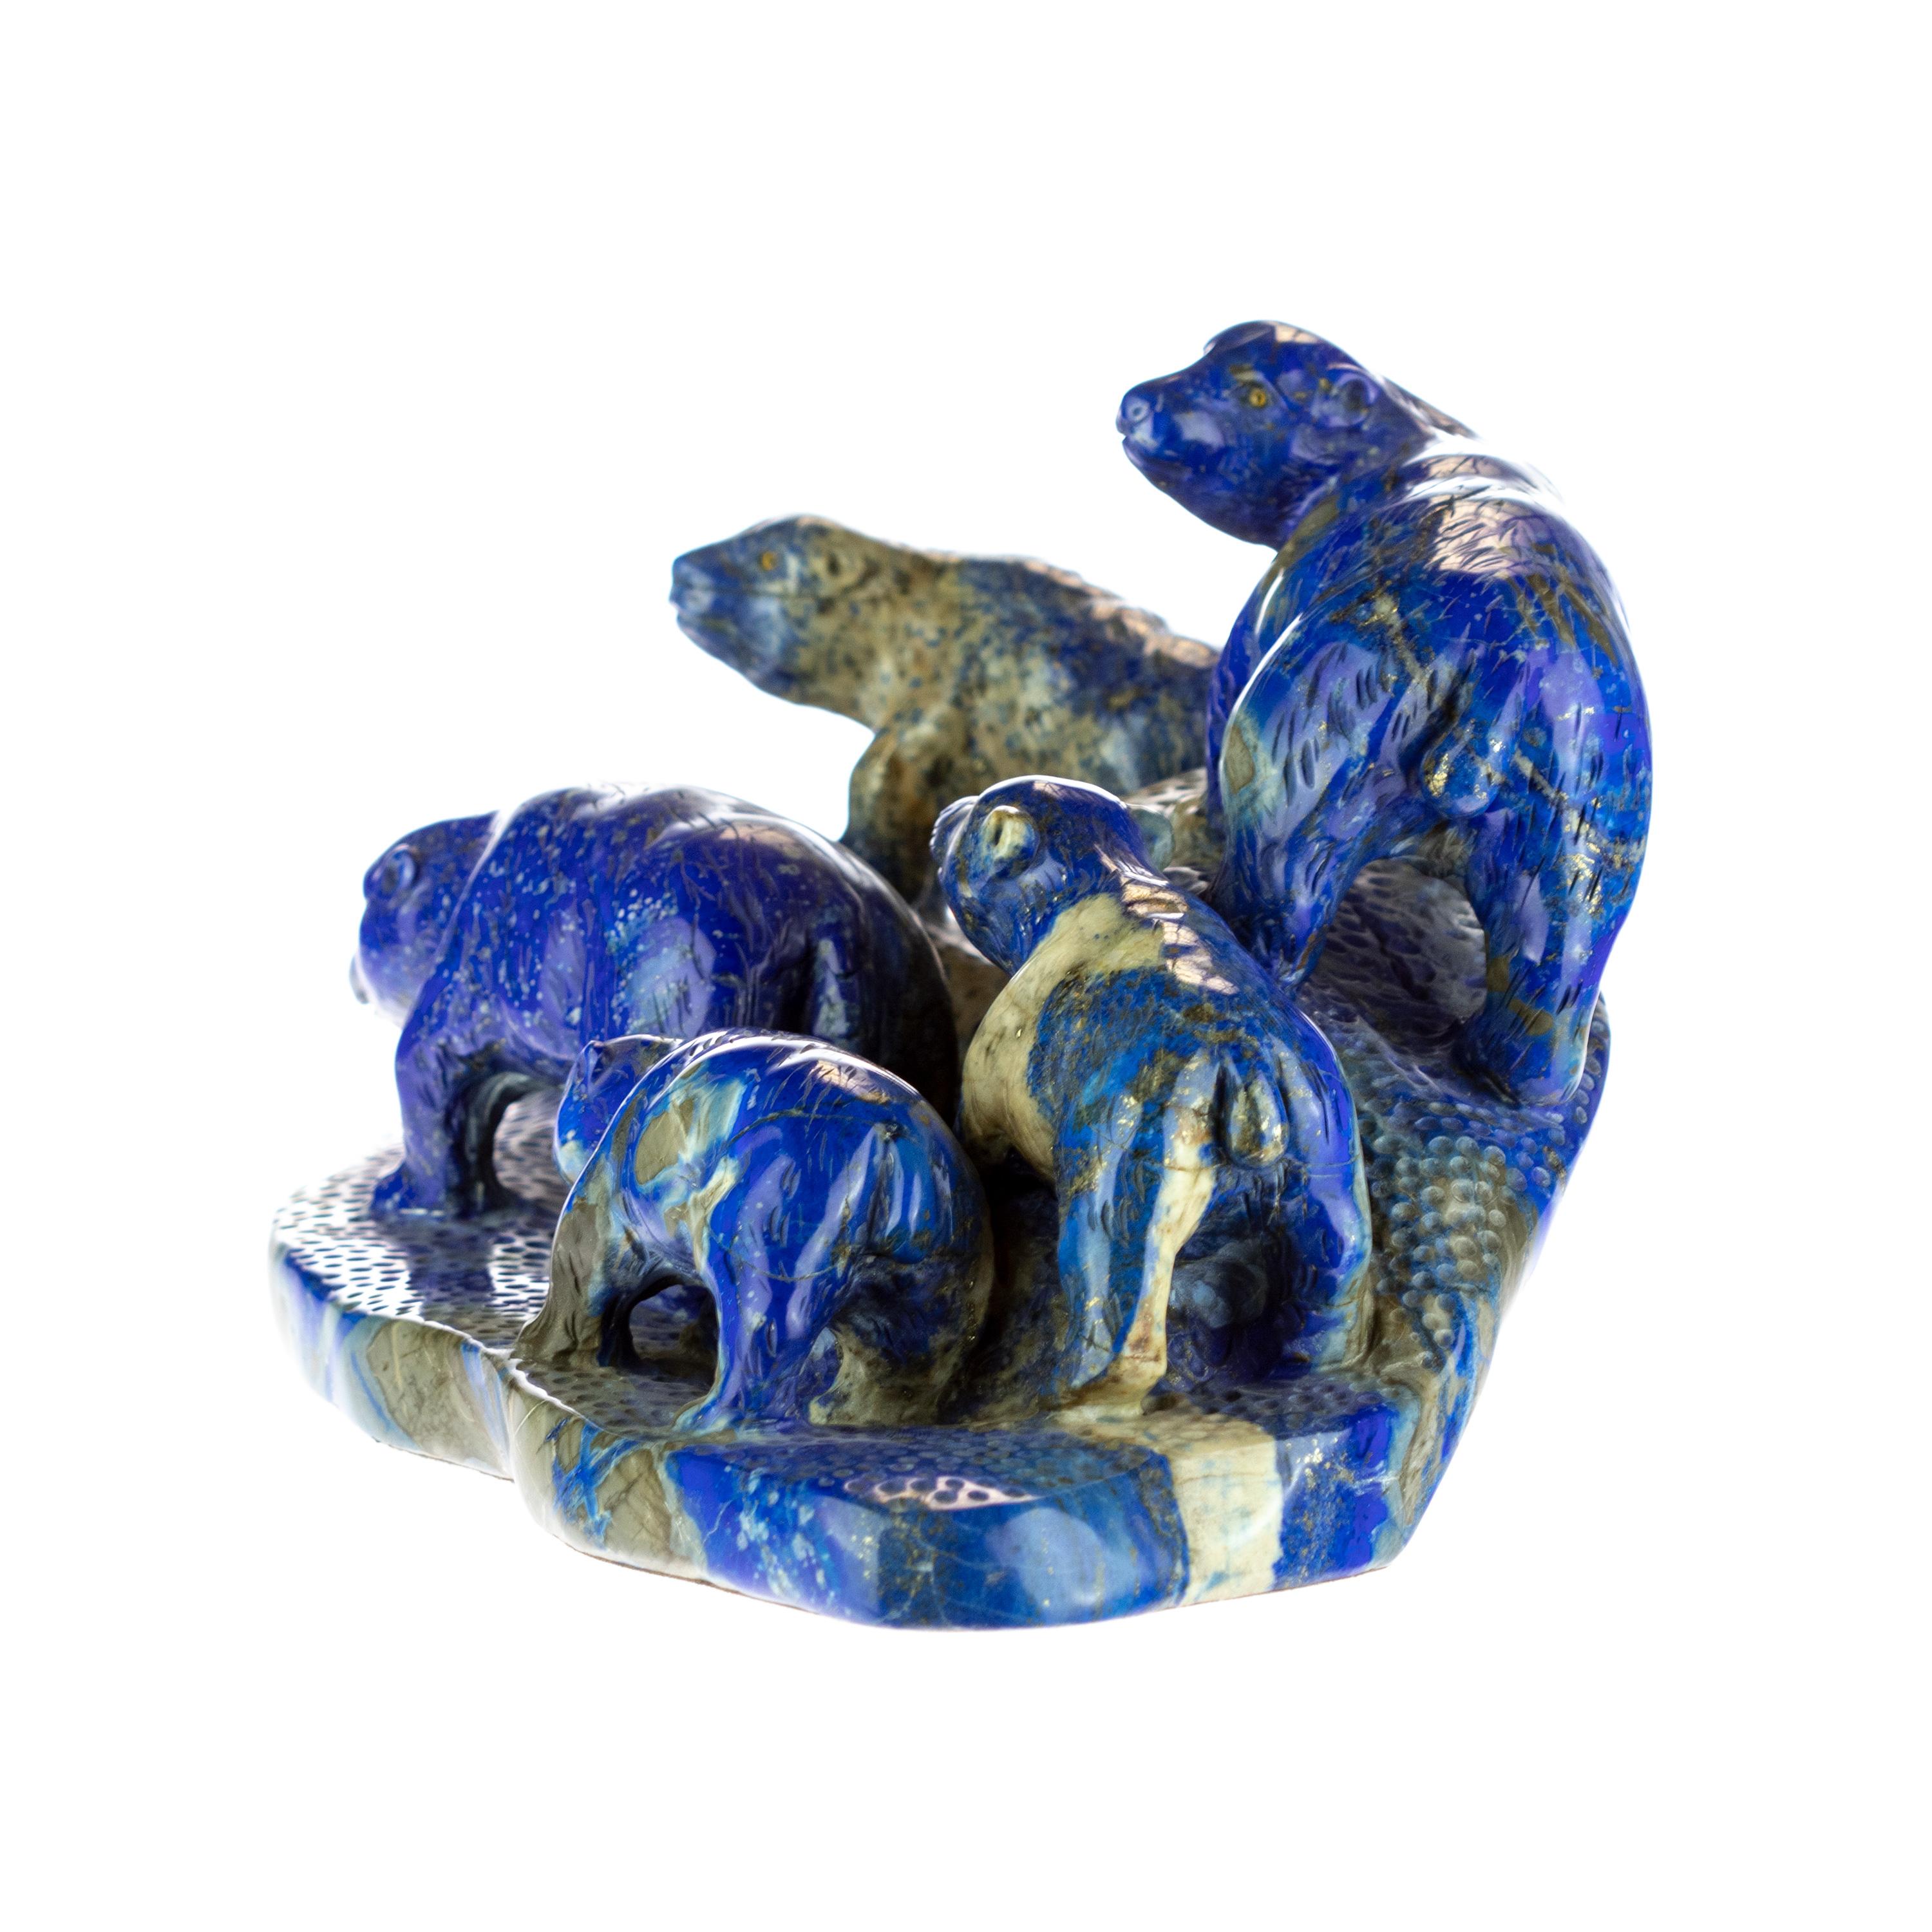 Hand-Carved Lapis Lazuli Blue Bears Family Carved Animal Artisanal Eastern Statue Sculpture For Sale